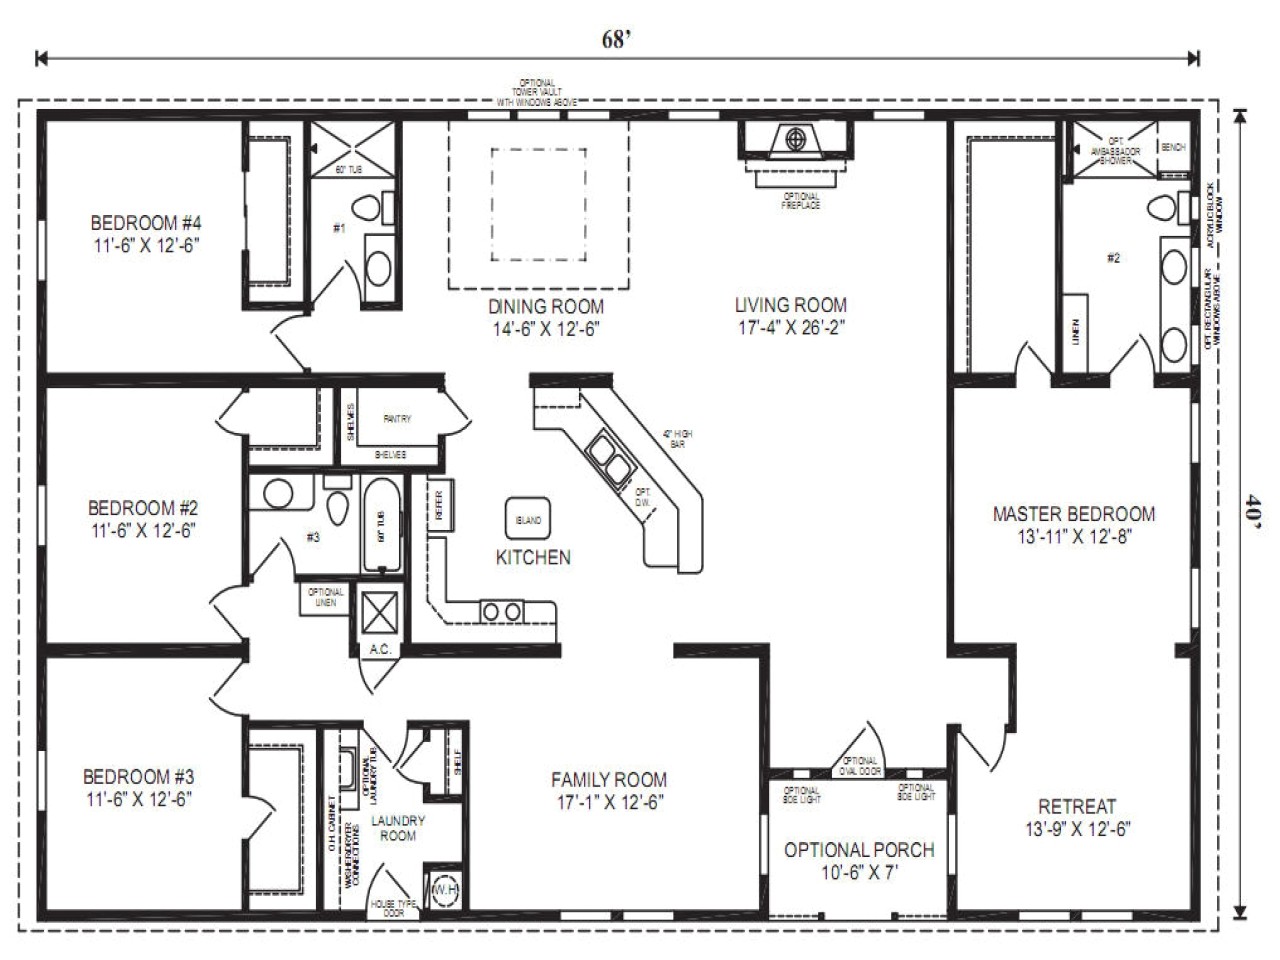 bedroom double wide legacy housing wides floor plans and 5 mobile home